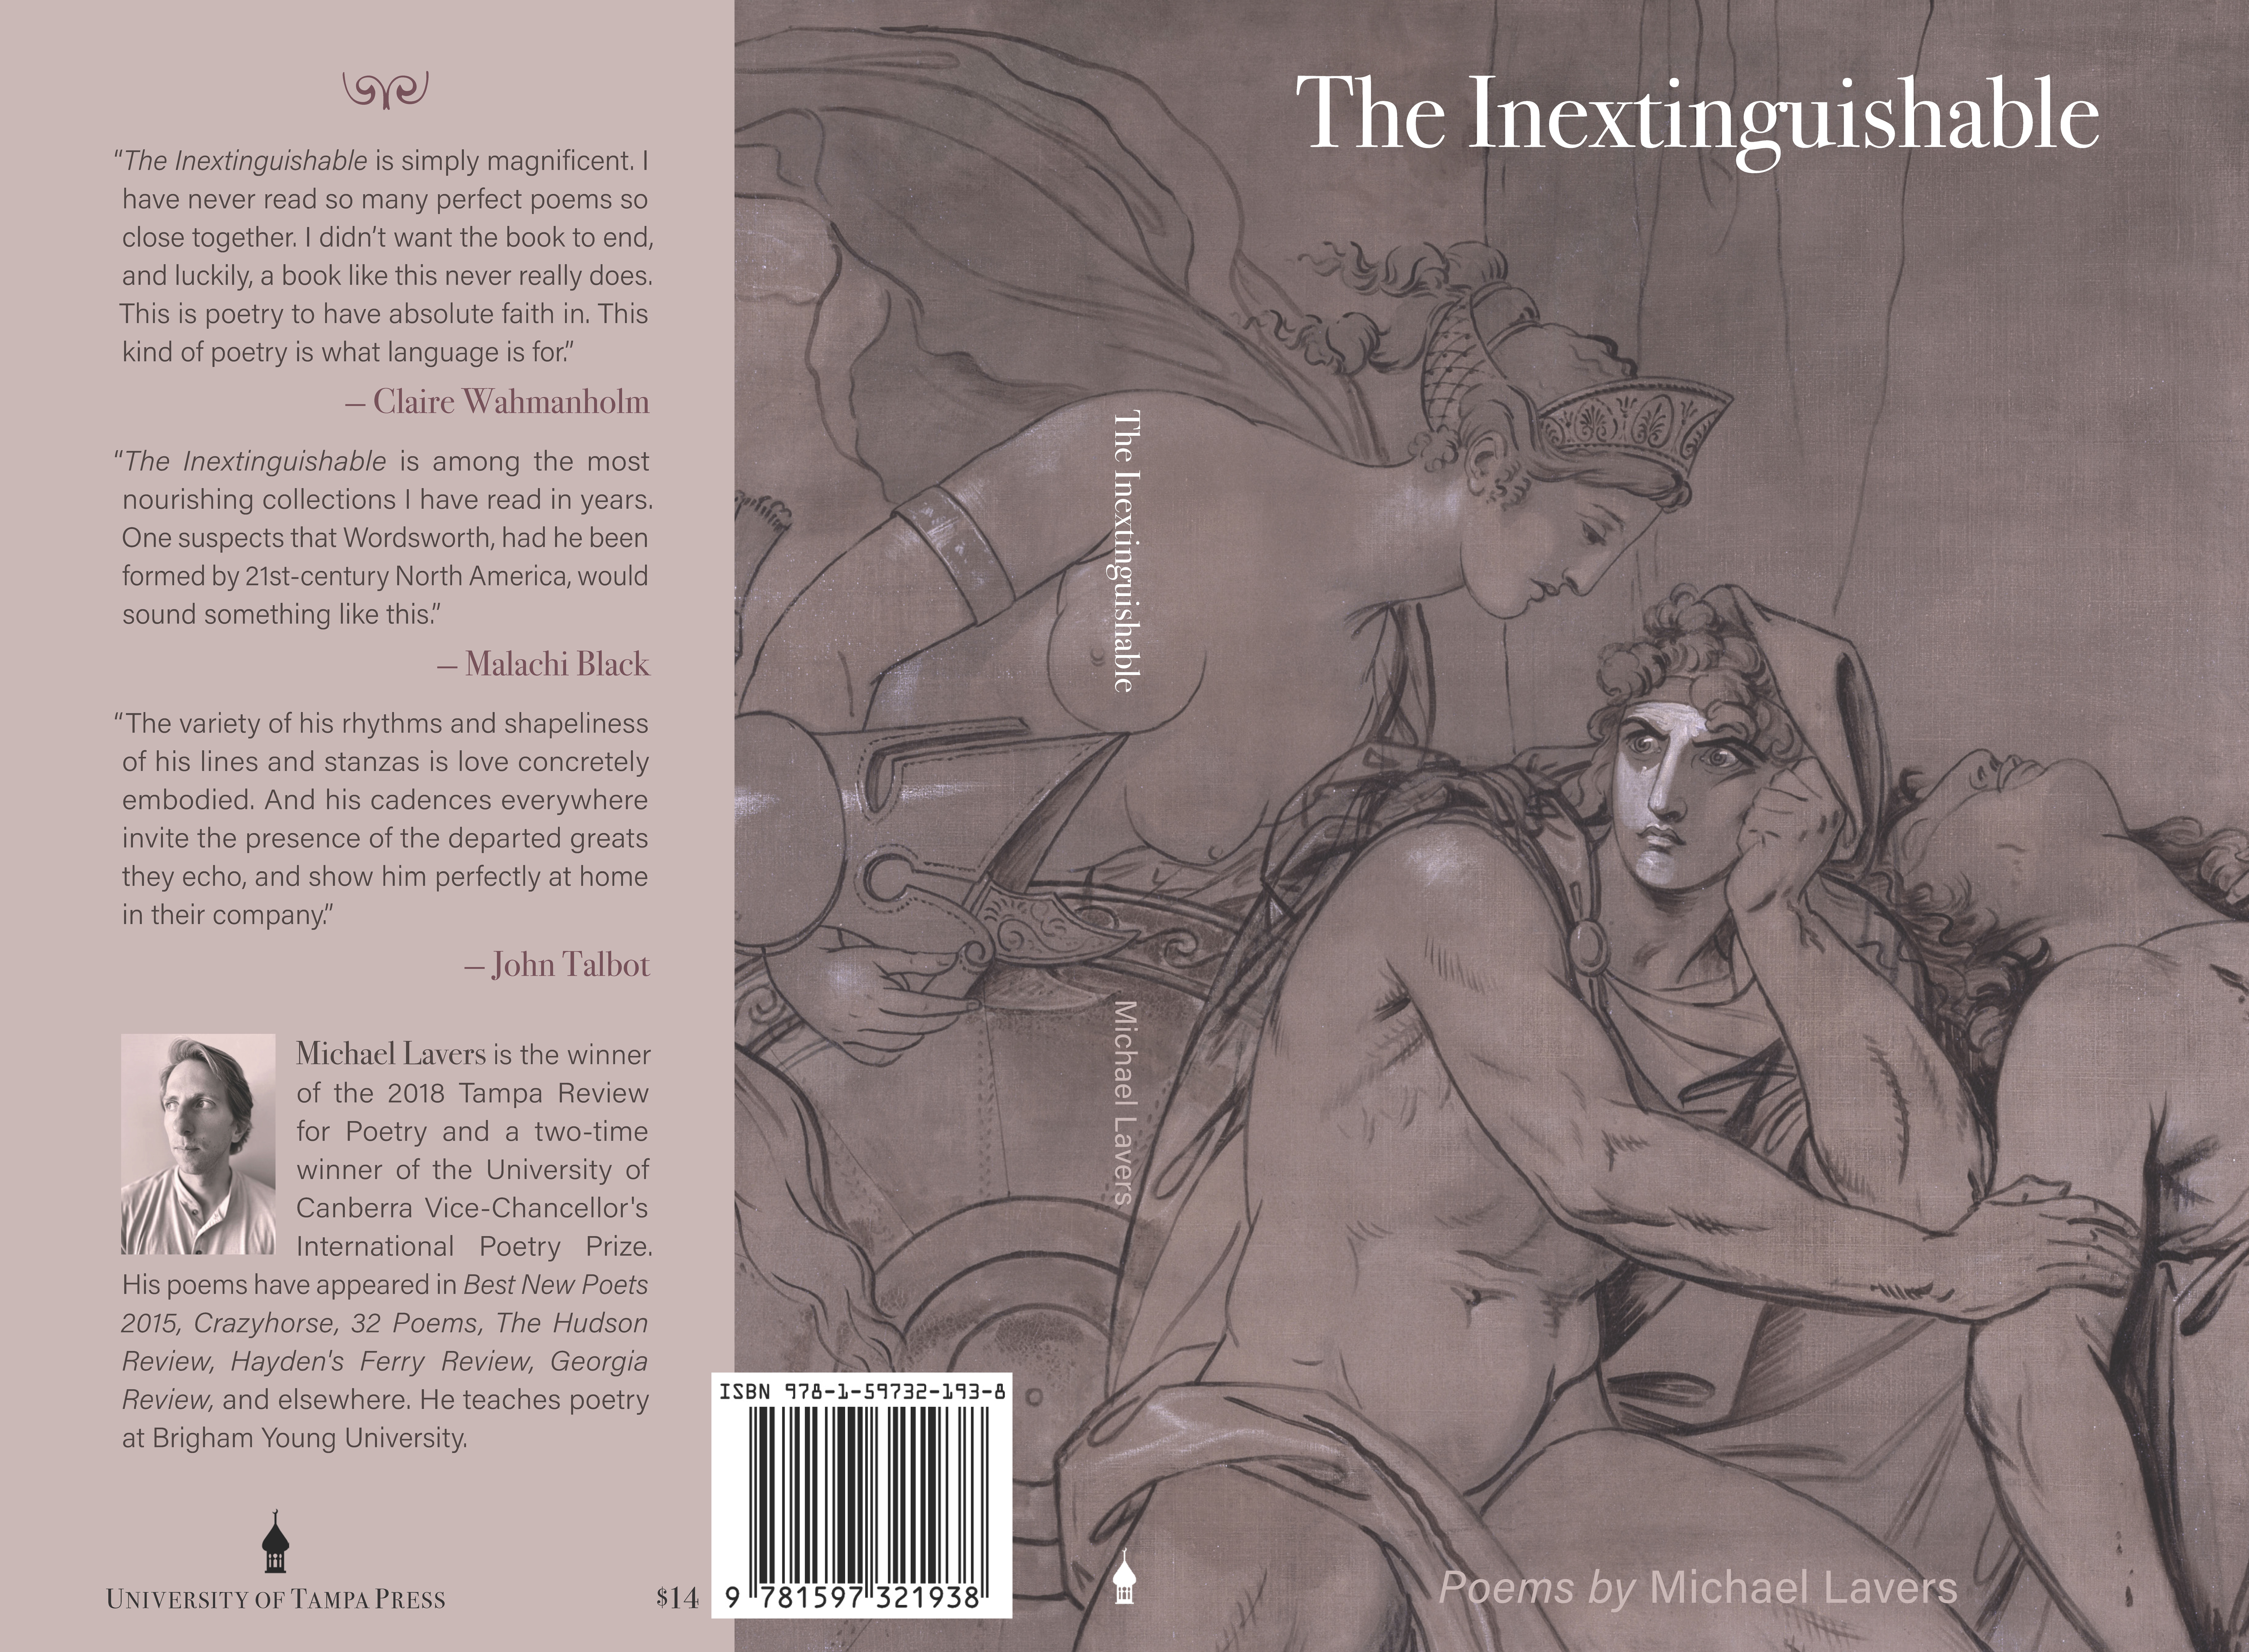 Image of the front cover of The Inextinguishable.